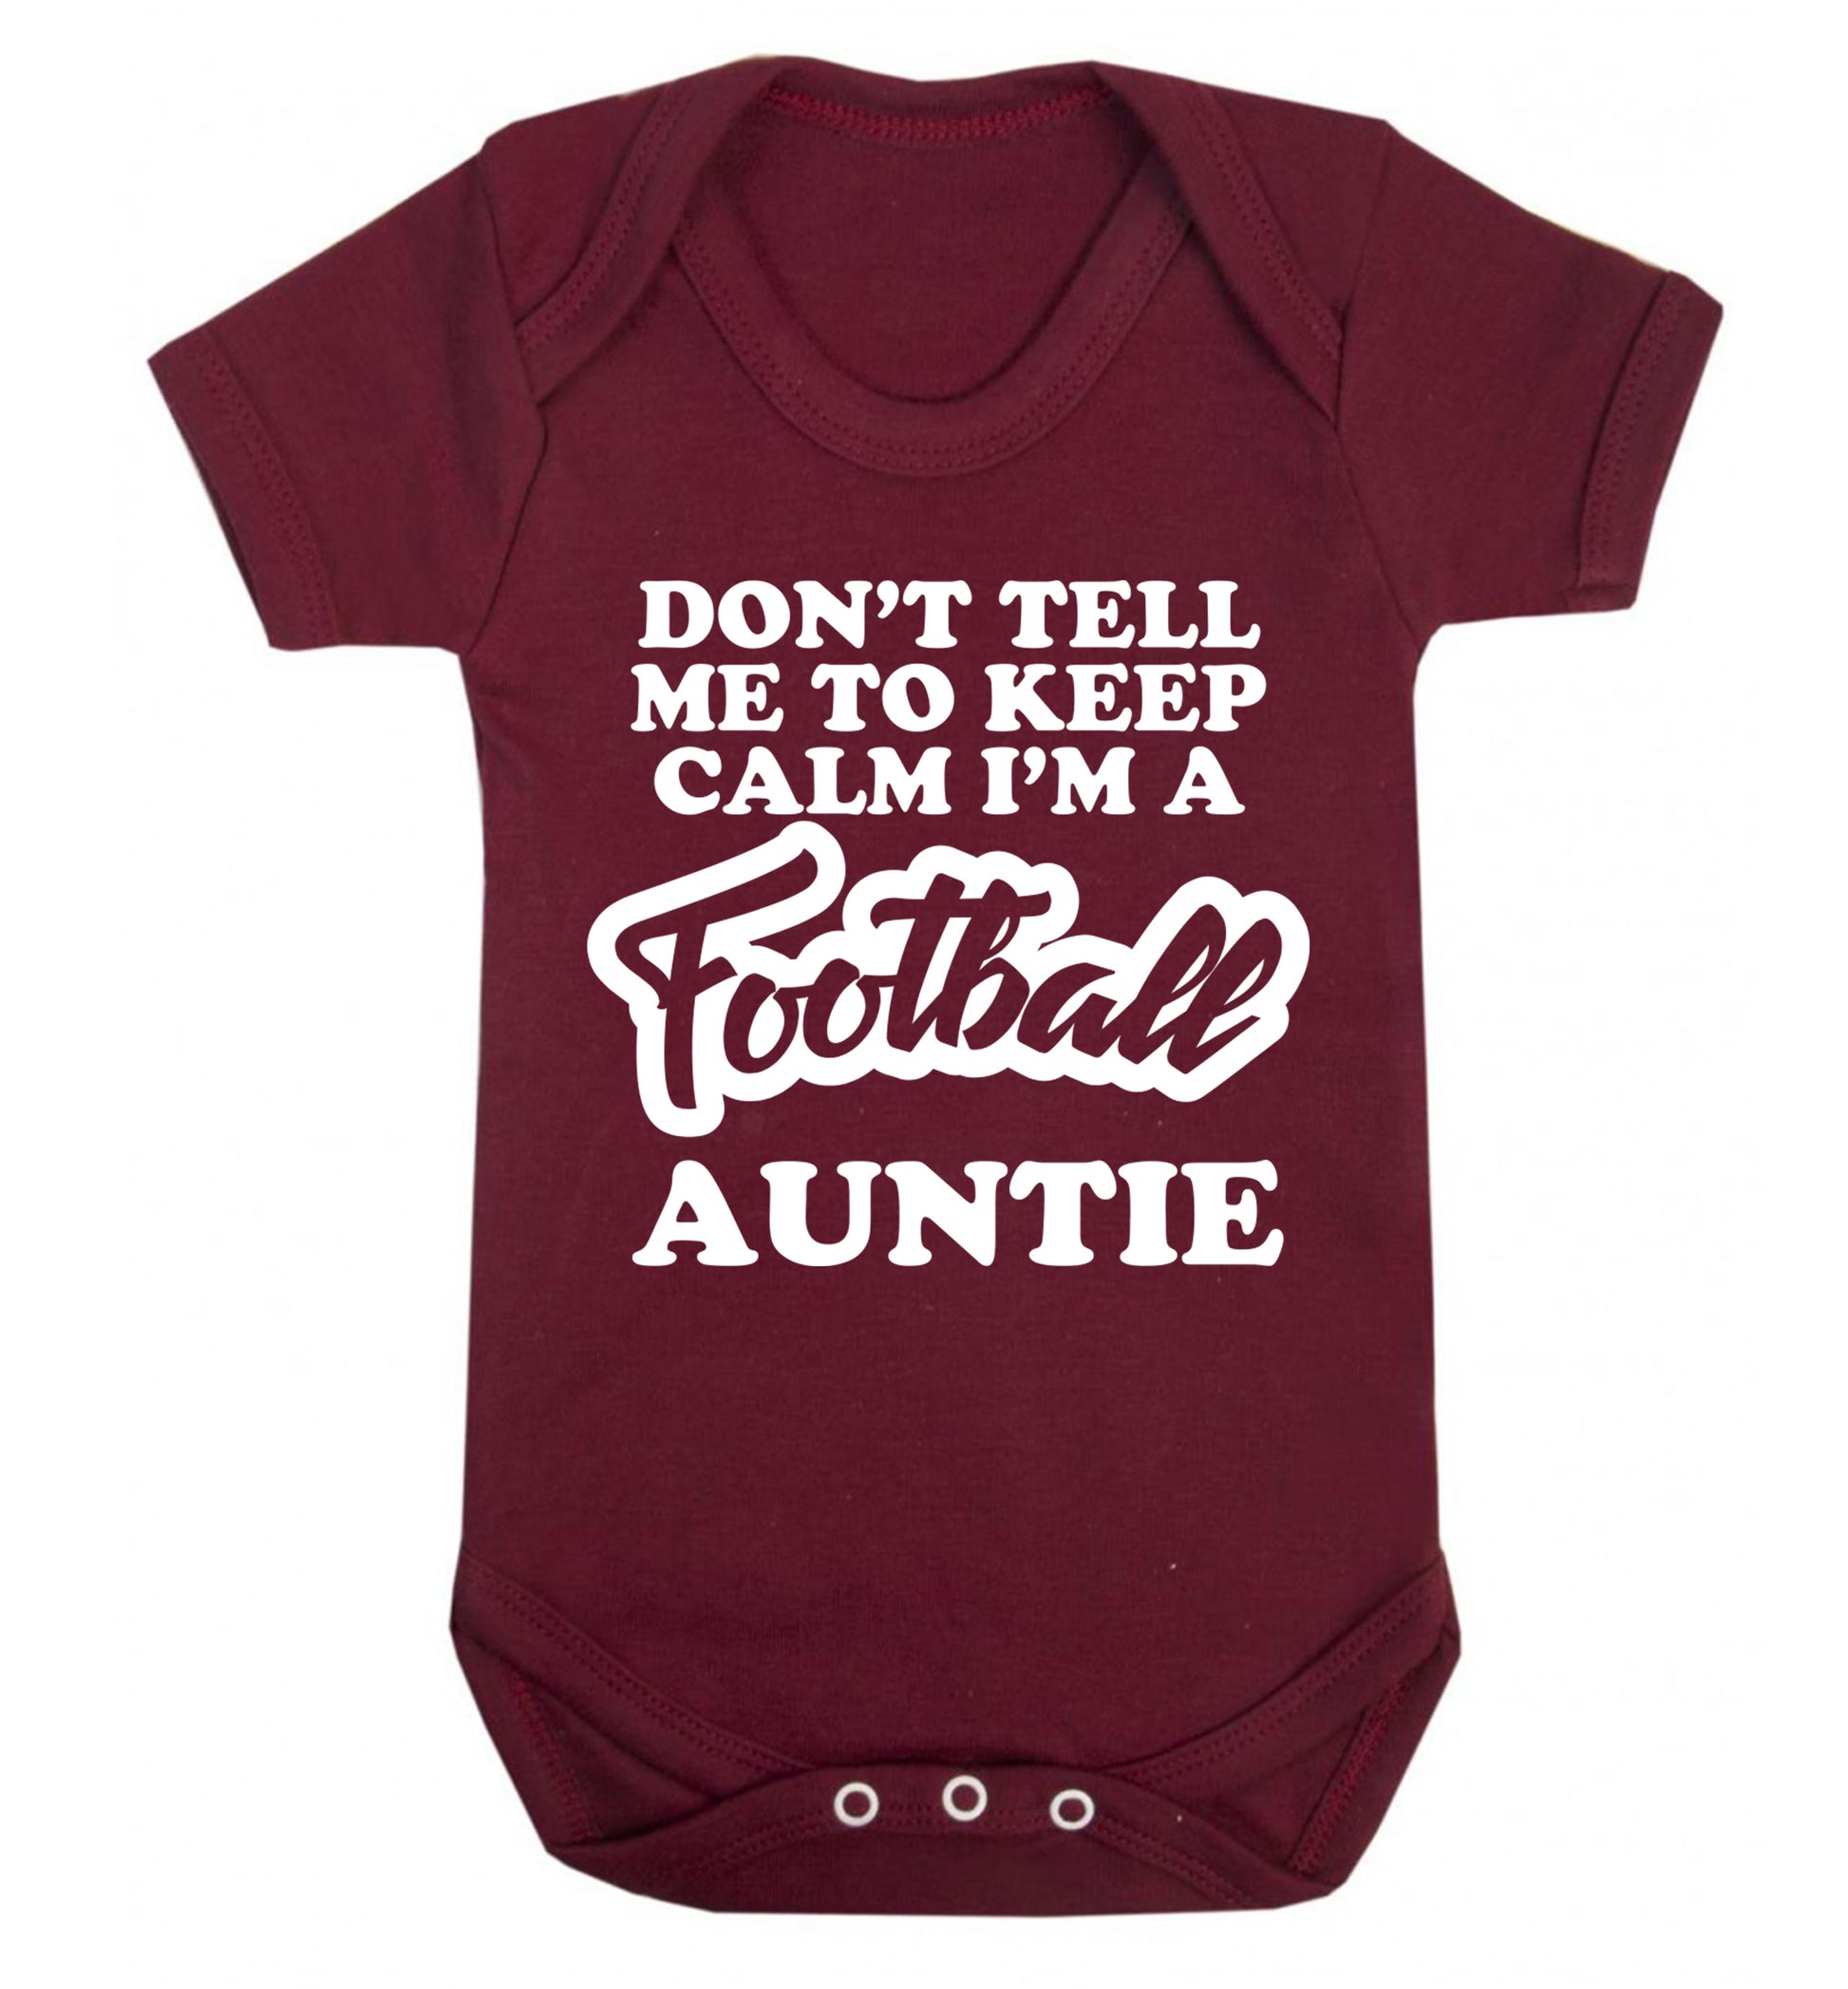 Don't tell me to keep calm I'm a football auntie Baby Vest maroon 18-24 months